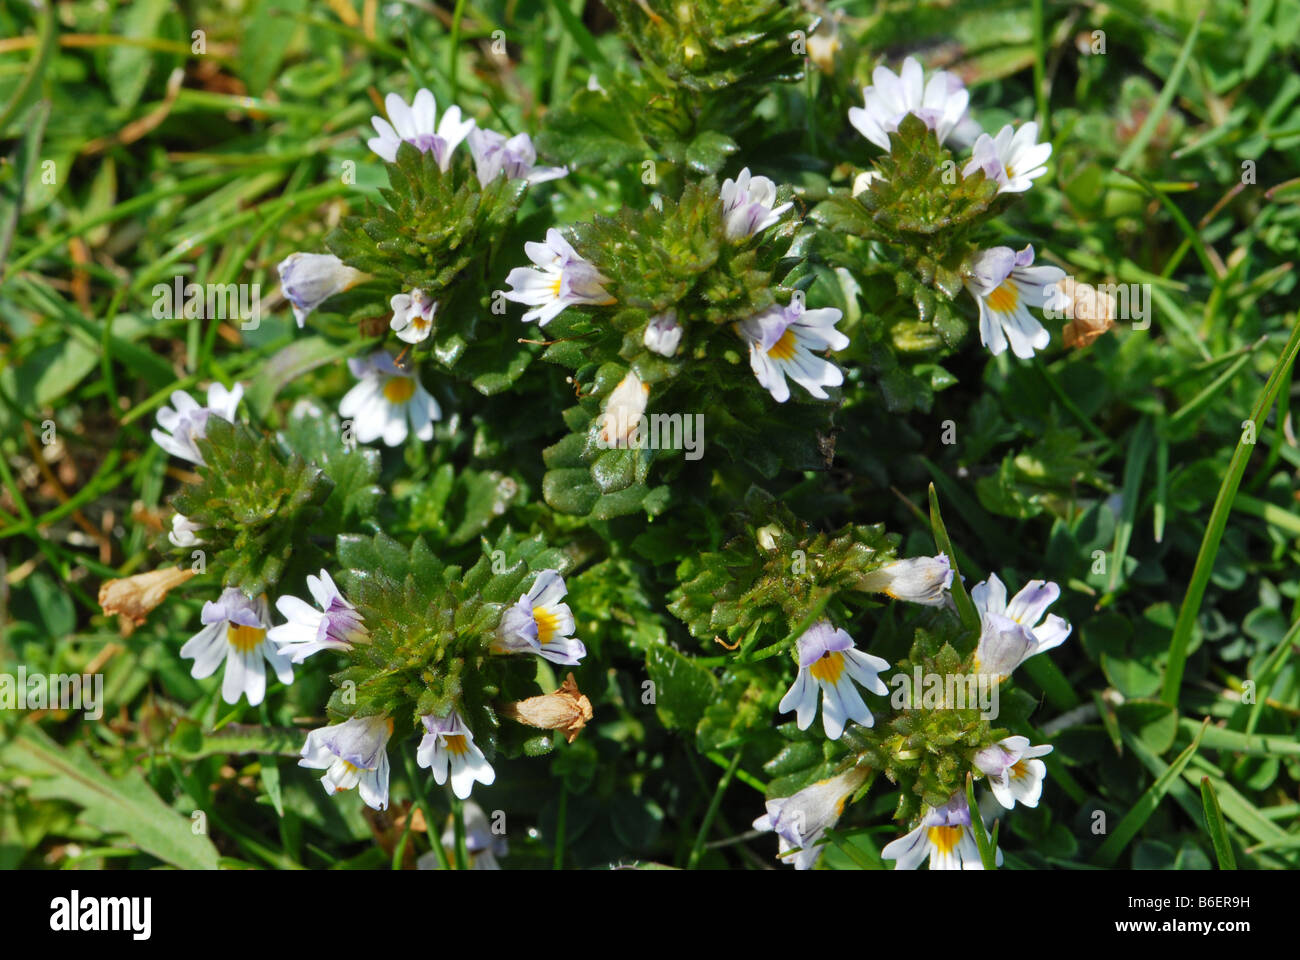 Eyebright in close up – showing whole plant Stock Photo